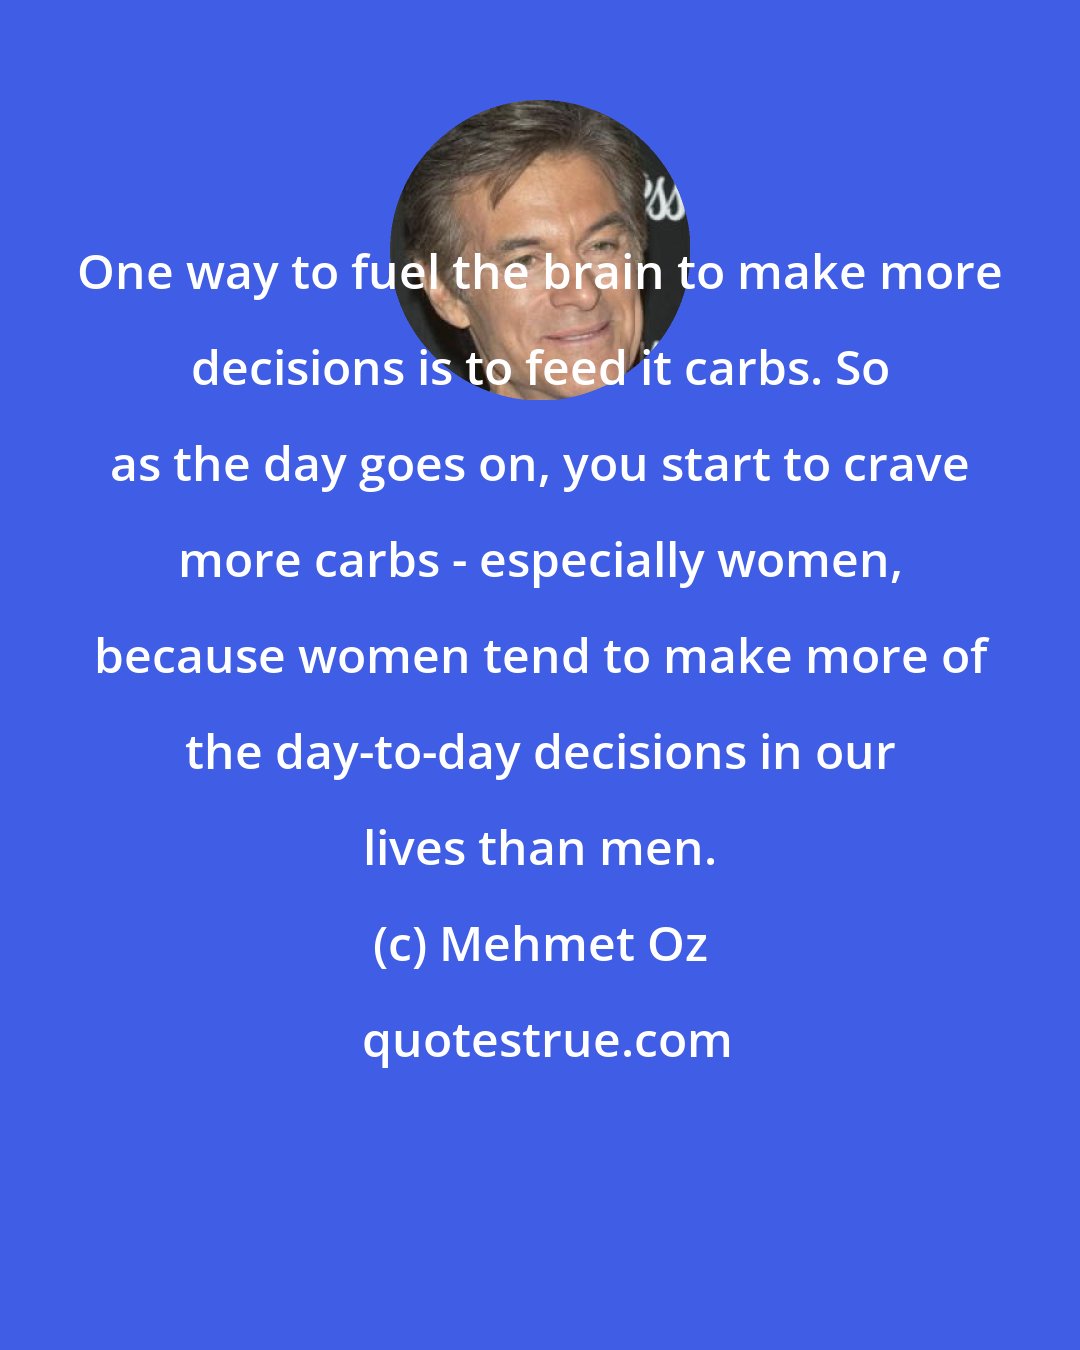 Mehmet Oz: One way to fuel the brain to make more decisions is to feed it carbs. So as the day goes on, you start to crave more carbs - especially women, because women tend to make more of the day-to-day decisions in our lives than men.